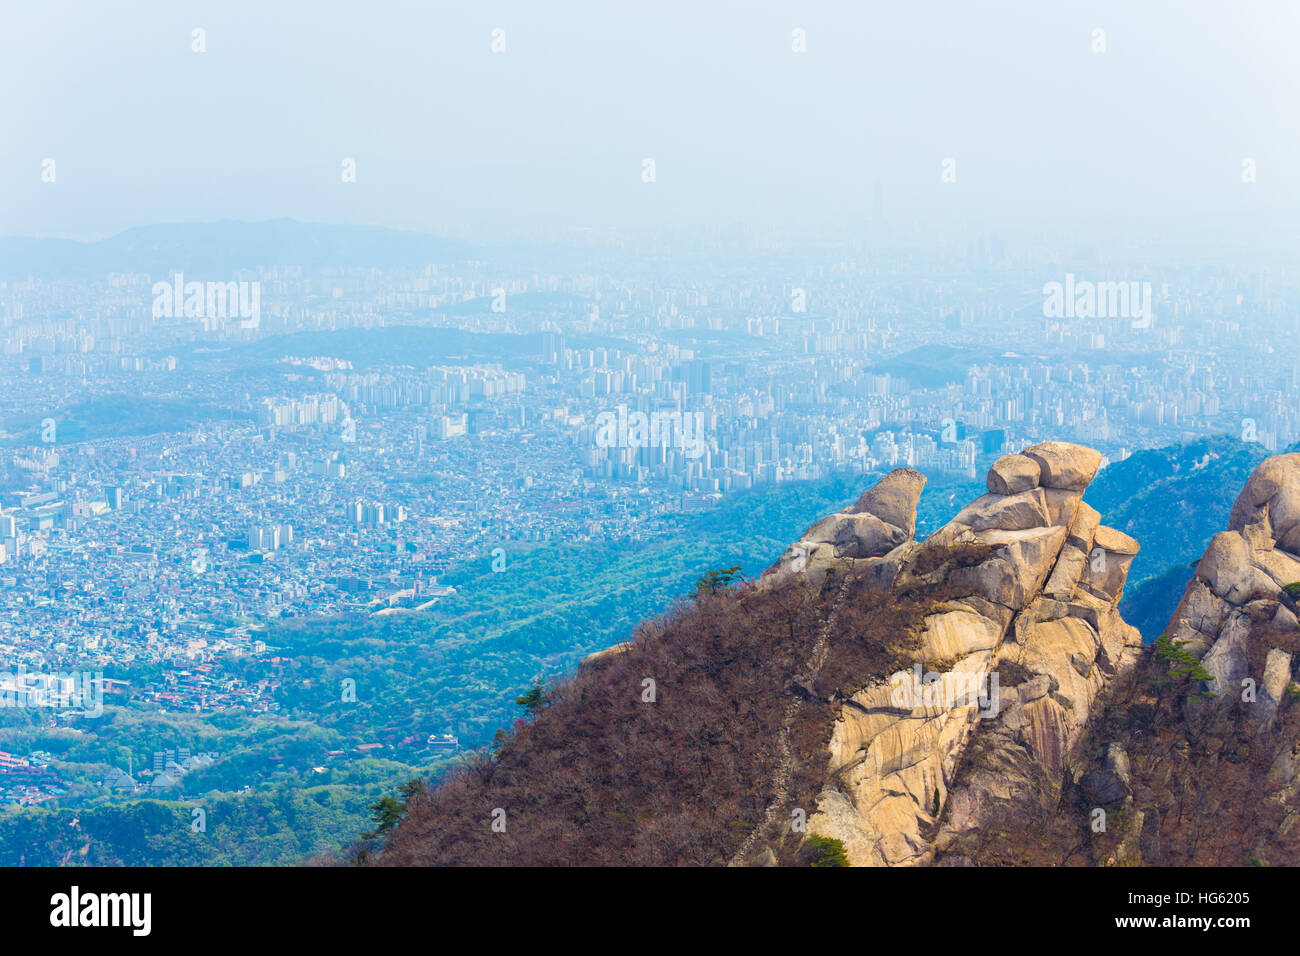 View of Seoul cityscape from peak of Bukhansan mountain where smog and air pollution prevents clear view buildings Stock Photo